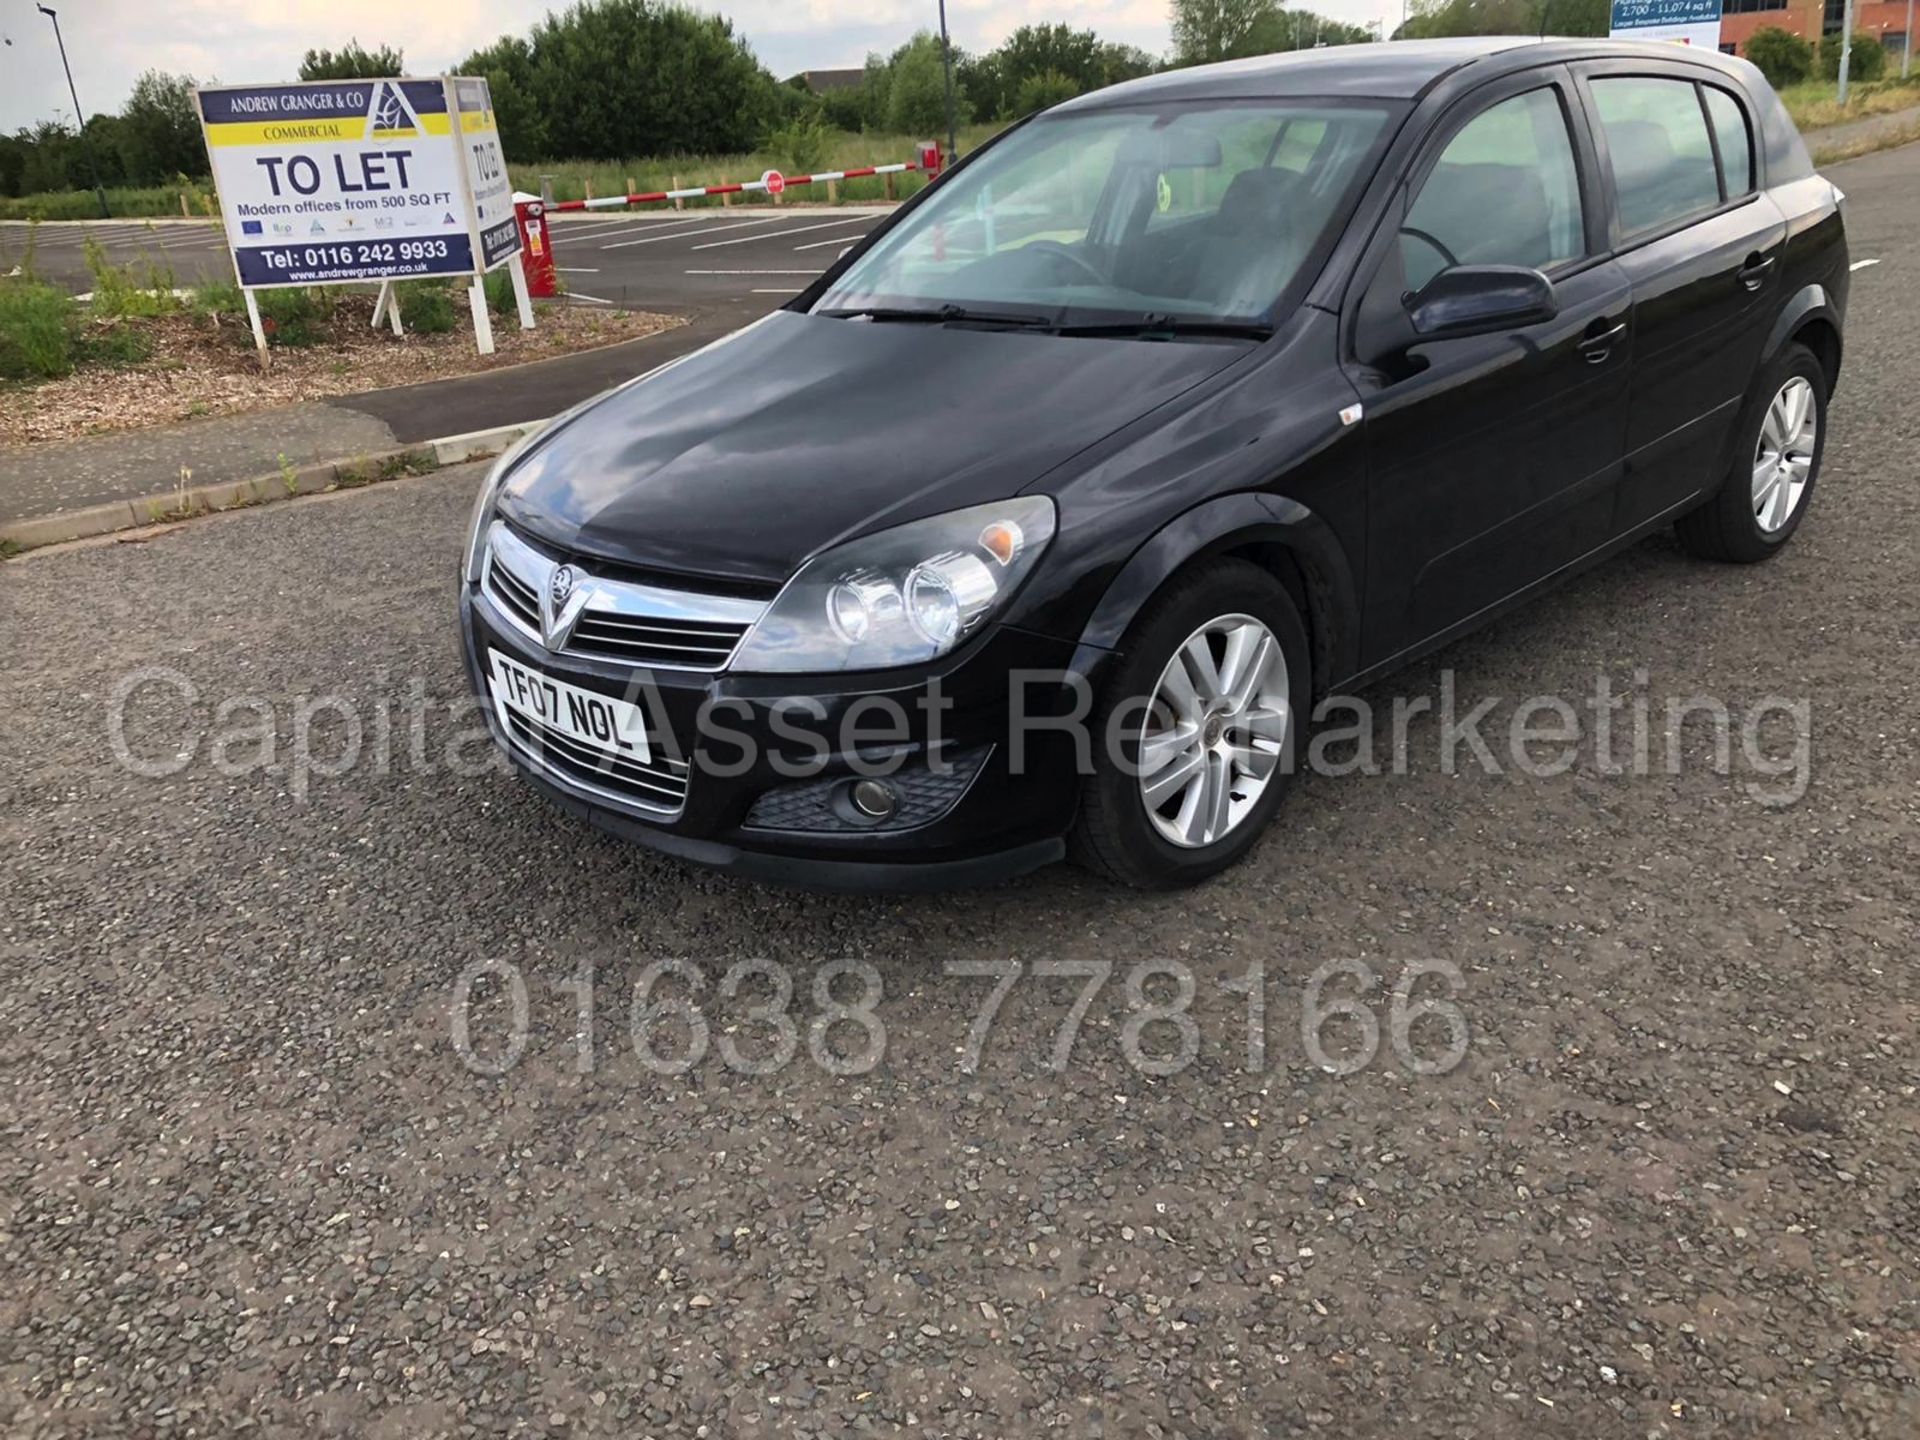 On Sale VAUXHALL ASTRA *SXI TWINPORT* HATCHBACK (2007) '1.4 PETROL' *AIR CON* (NO VAT) - Image 4 of 16